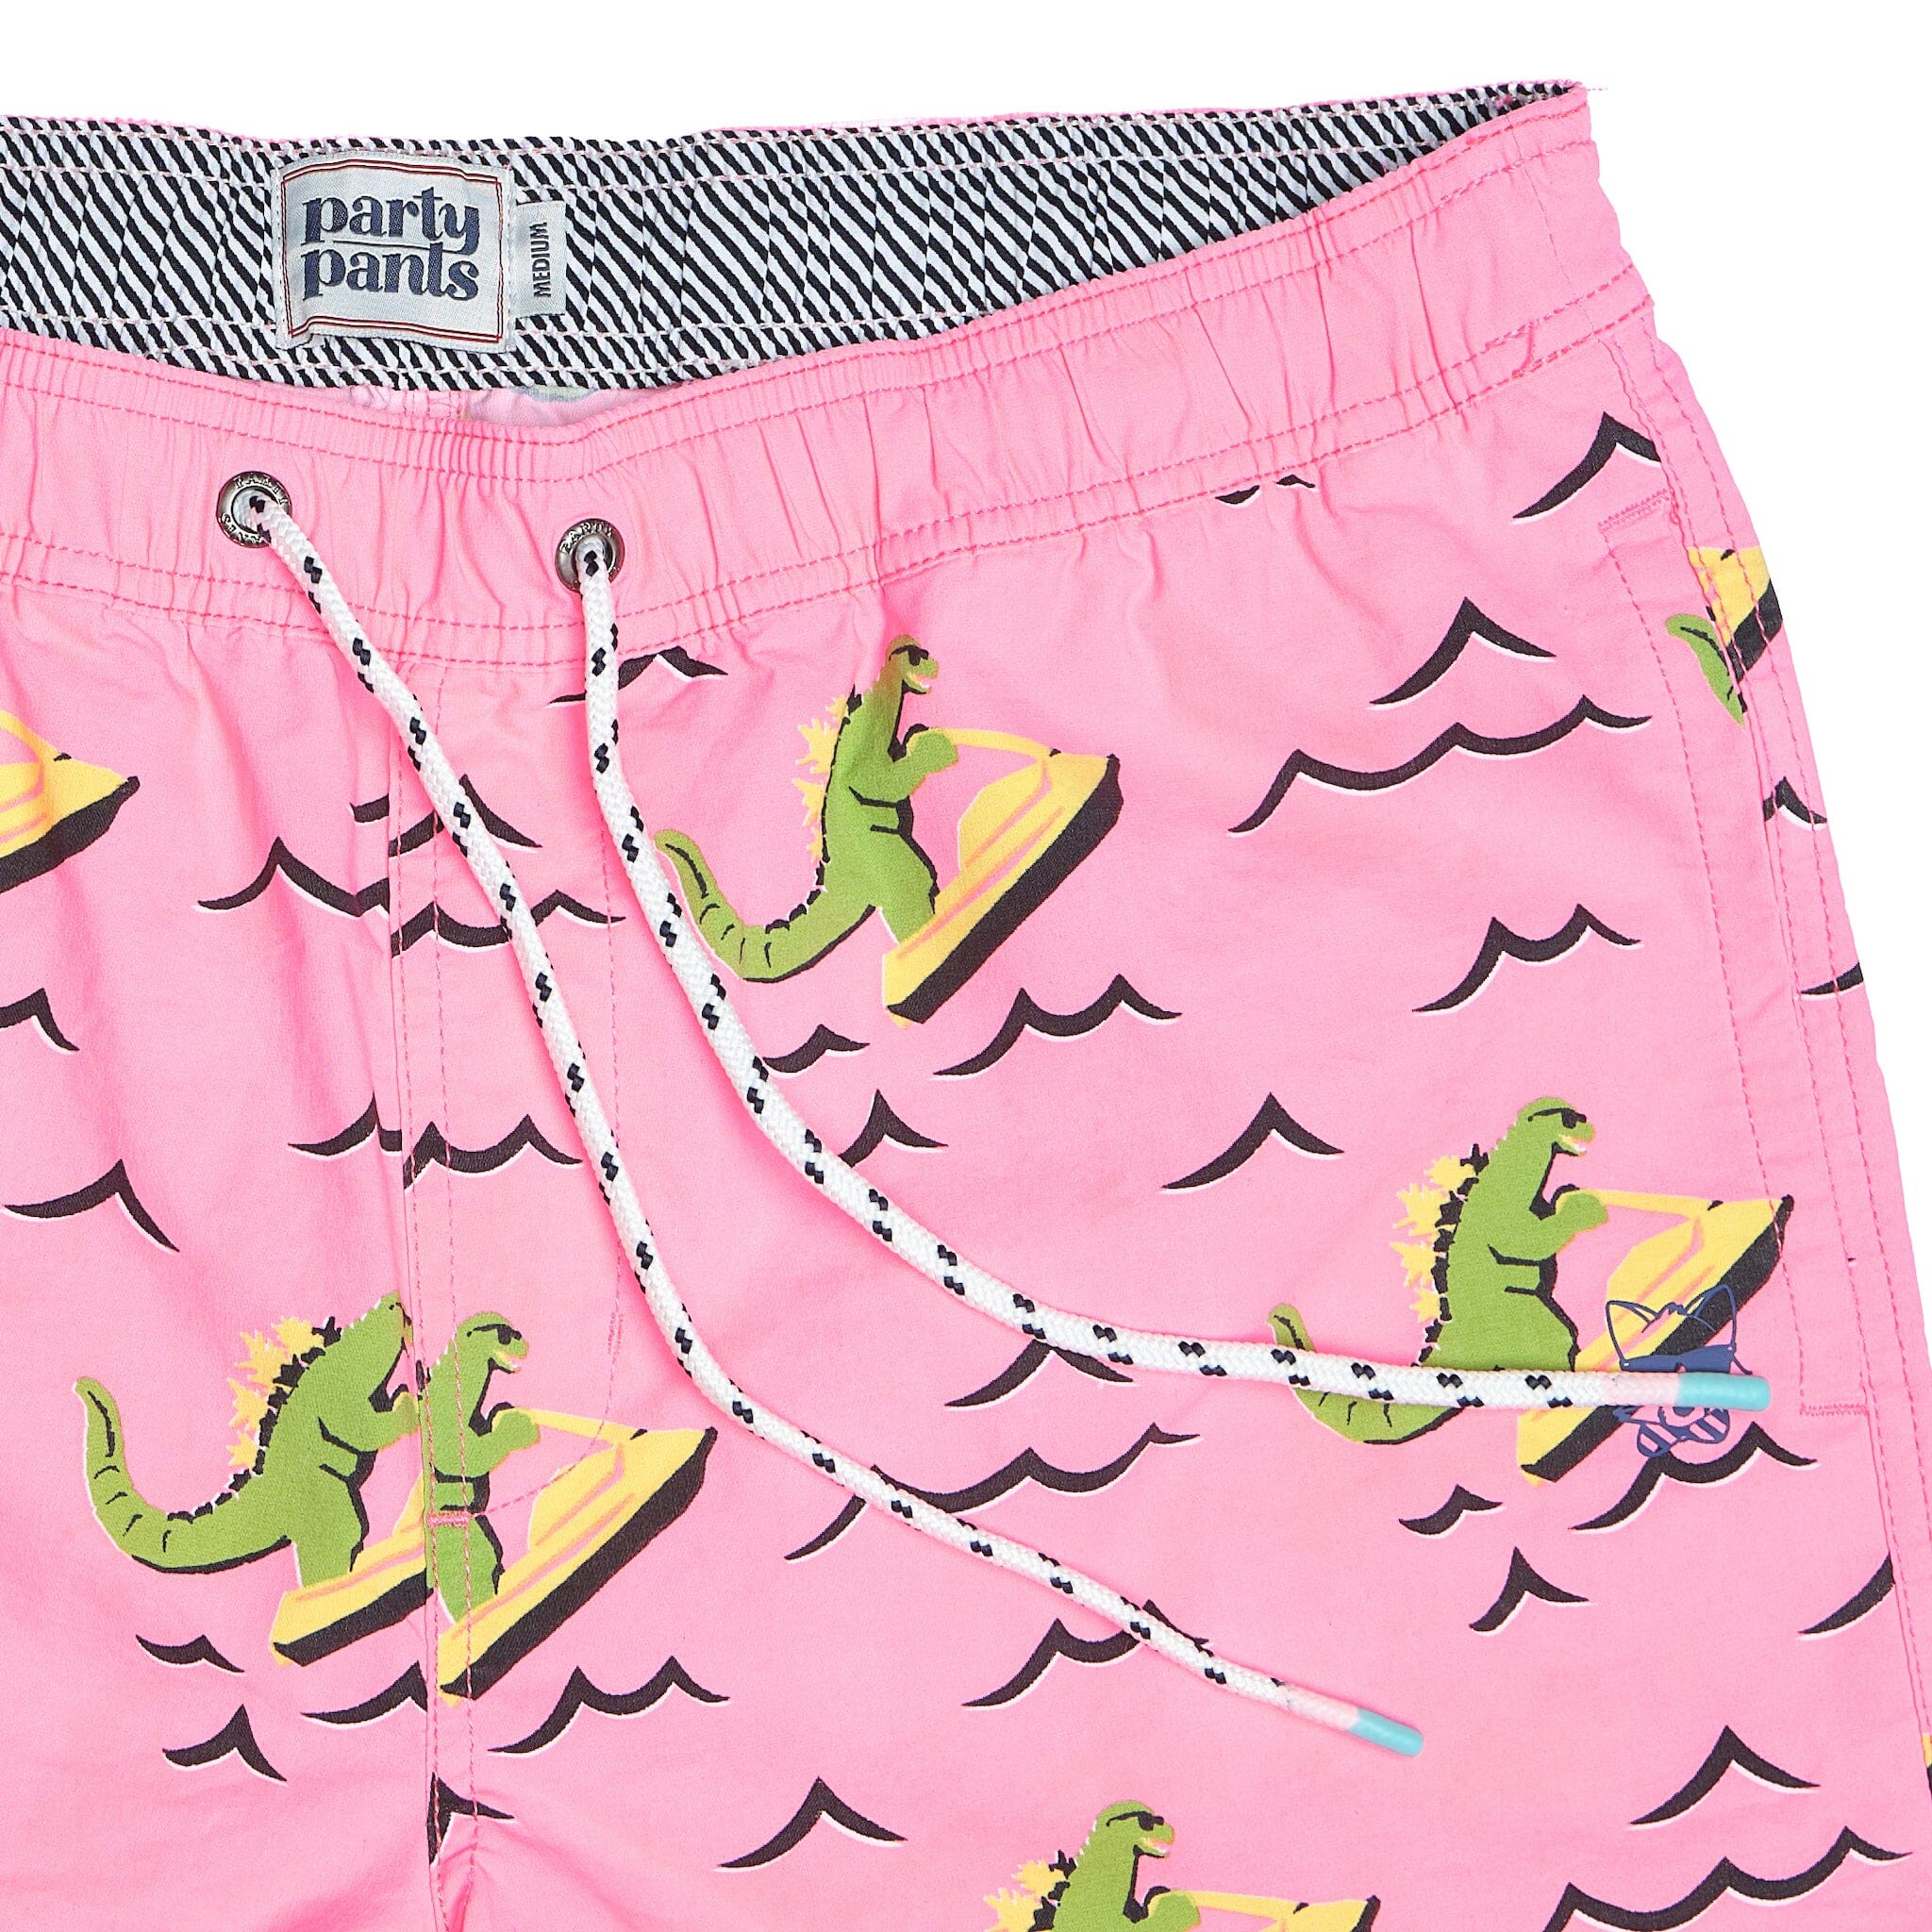 DINO RIPPER PARTY STARTER SHORT - PINK SALE SHORTS PARTY PANTS 